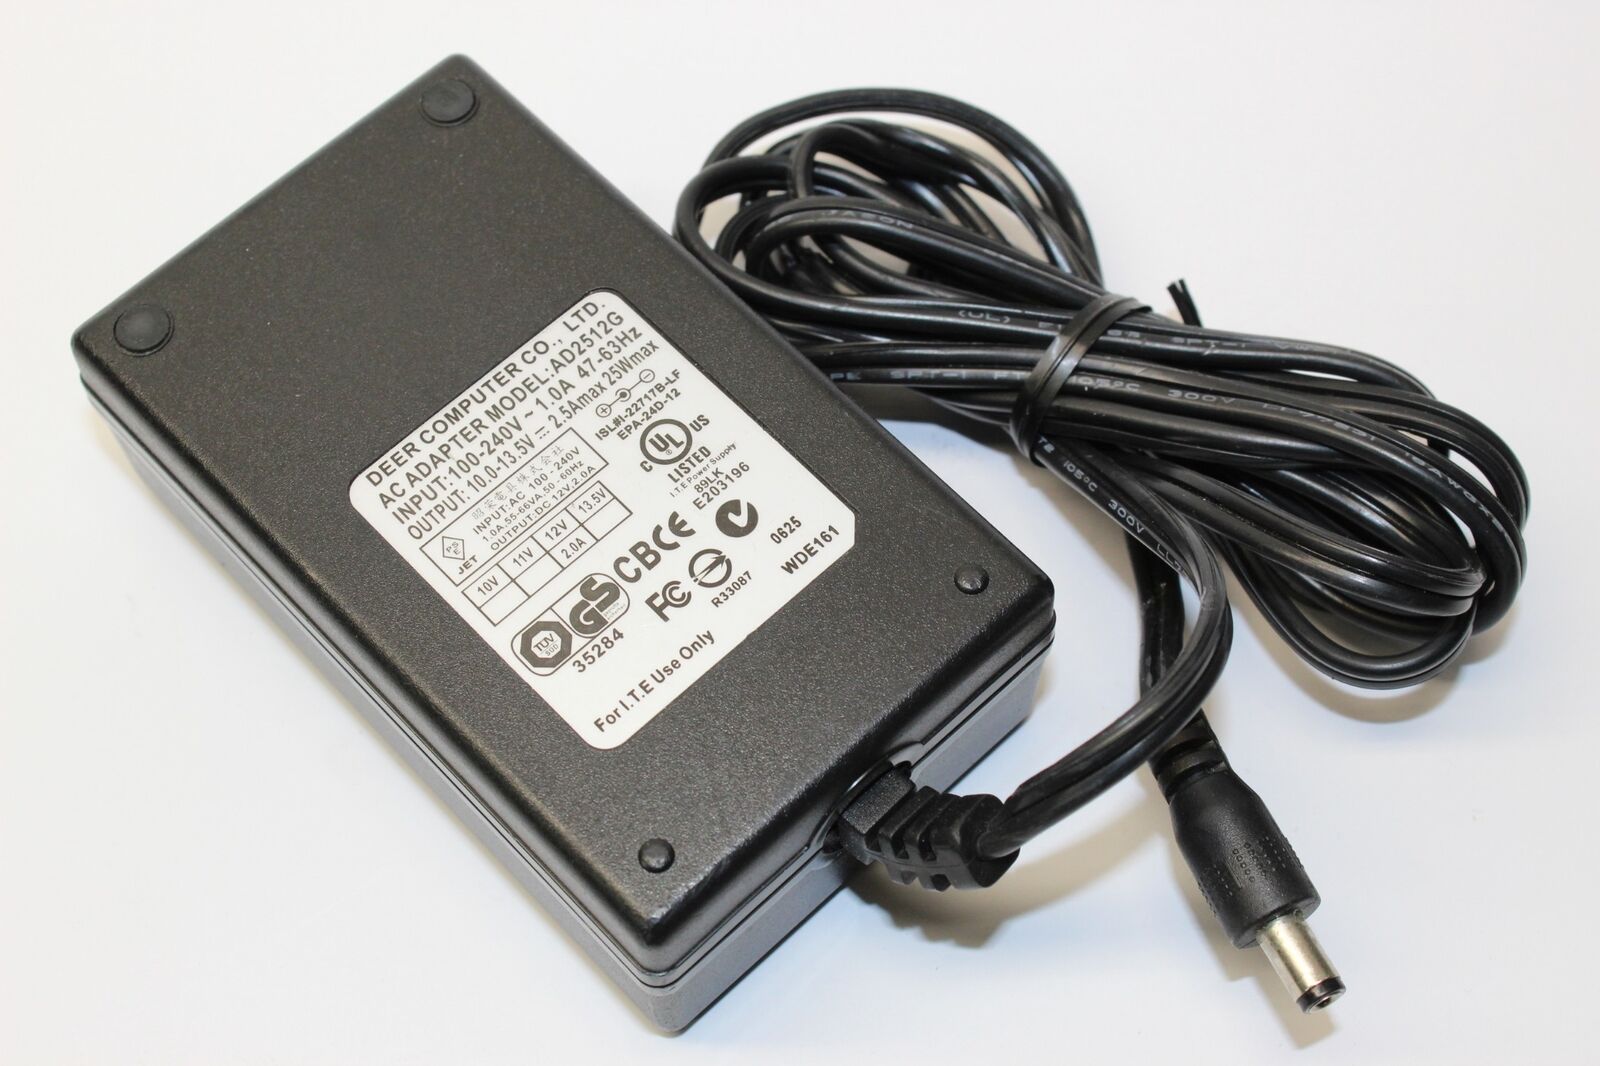 New 10-13.5V 2.5A Deer Computer AD2512G ITE Power Supply Ac Adapter